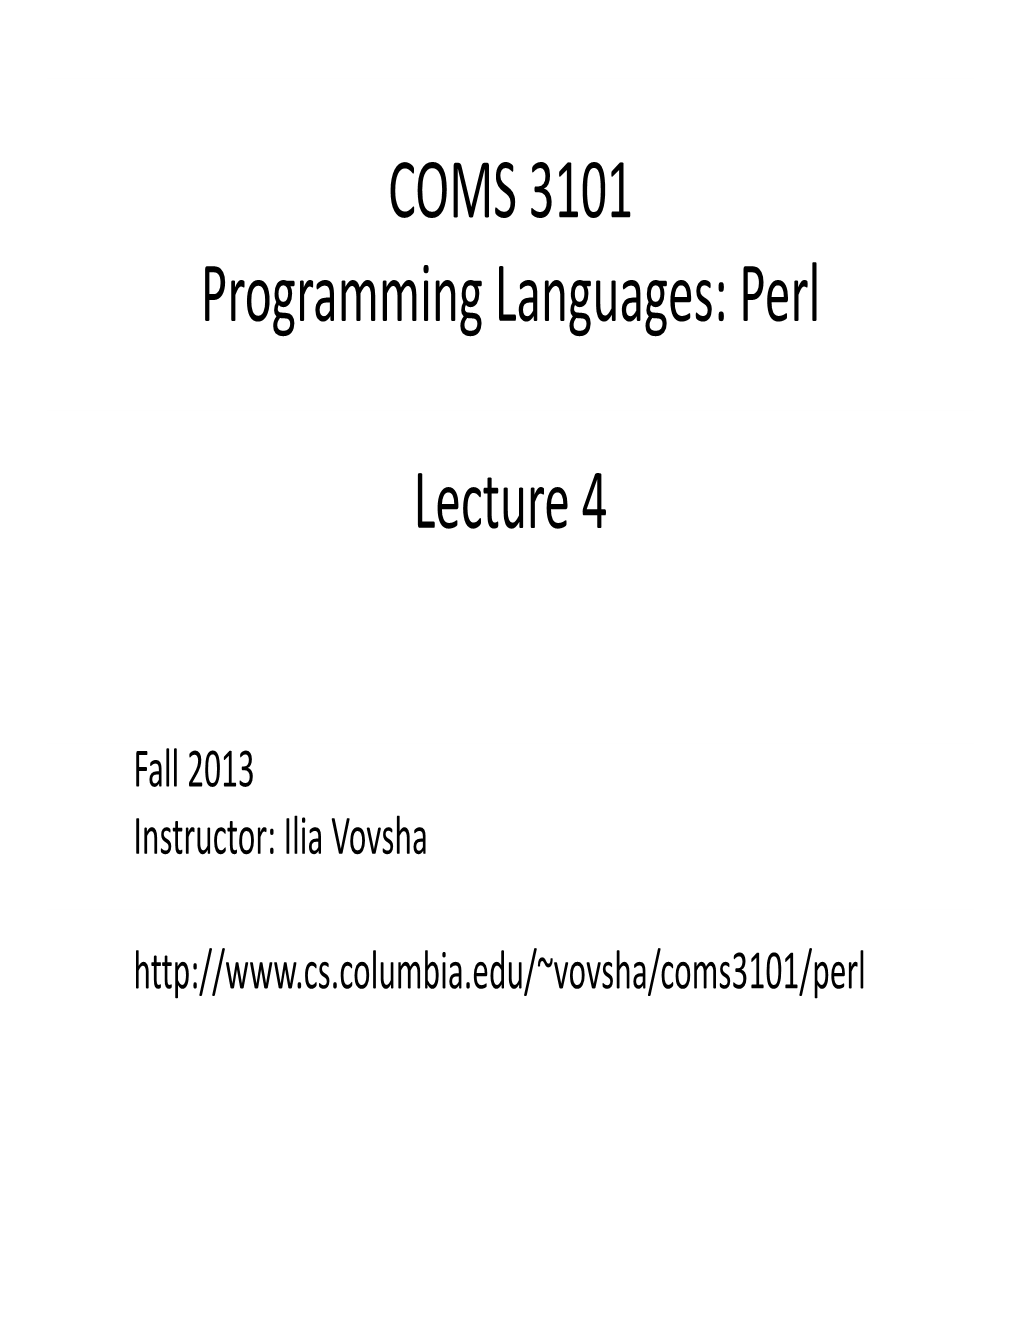 COMS 3101 Programming Languages: Perl Lecture 4